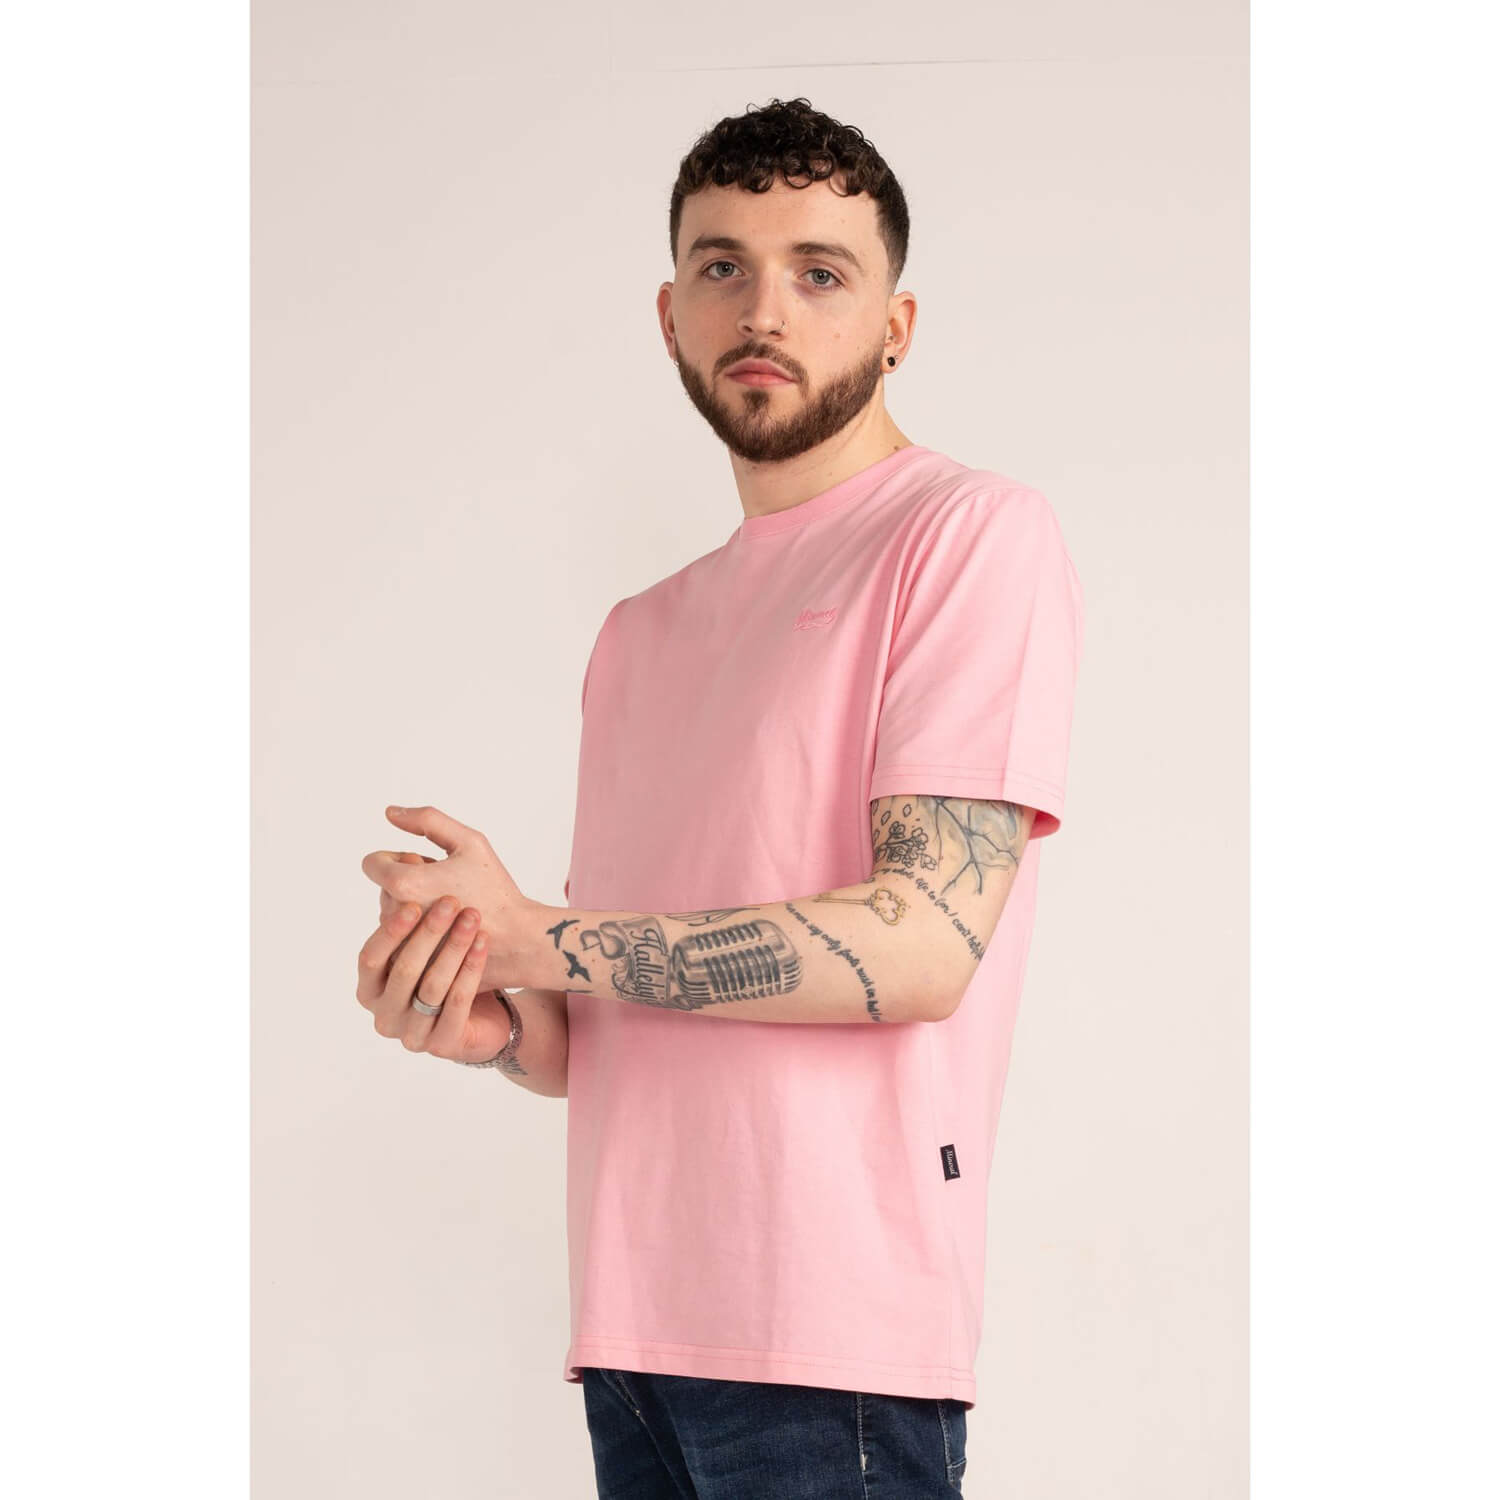 Mineral Glock Plain Tee - Pink 1 Shaws Department Stores